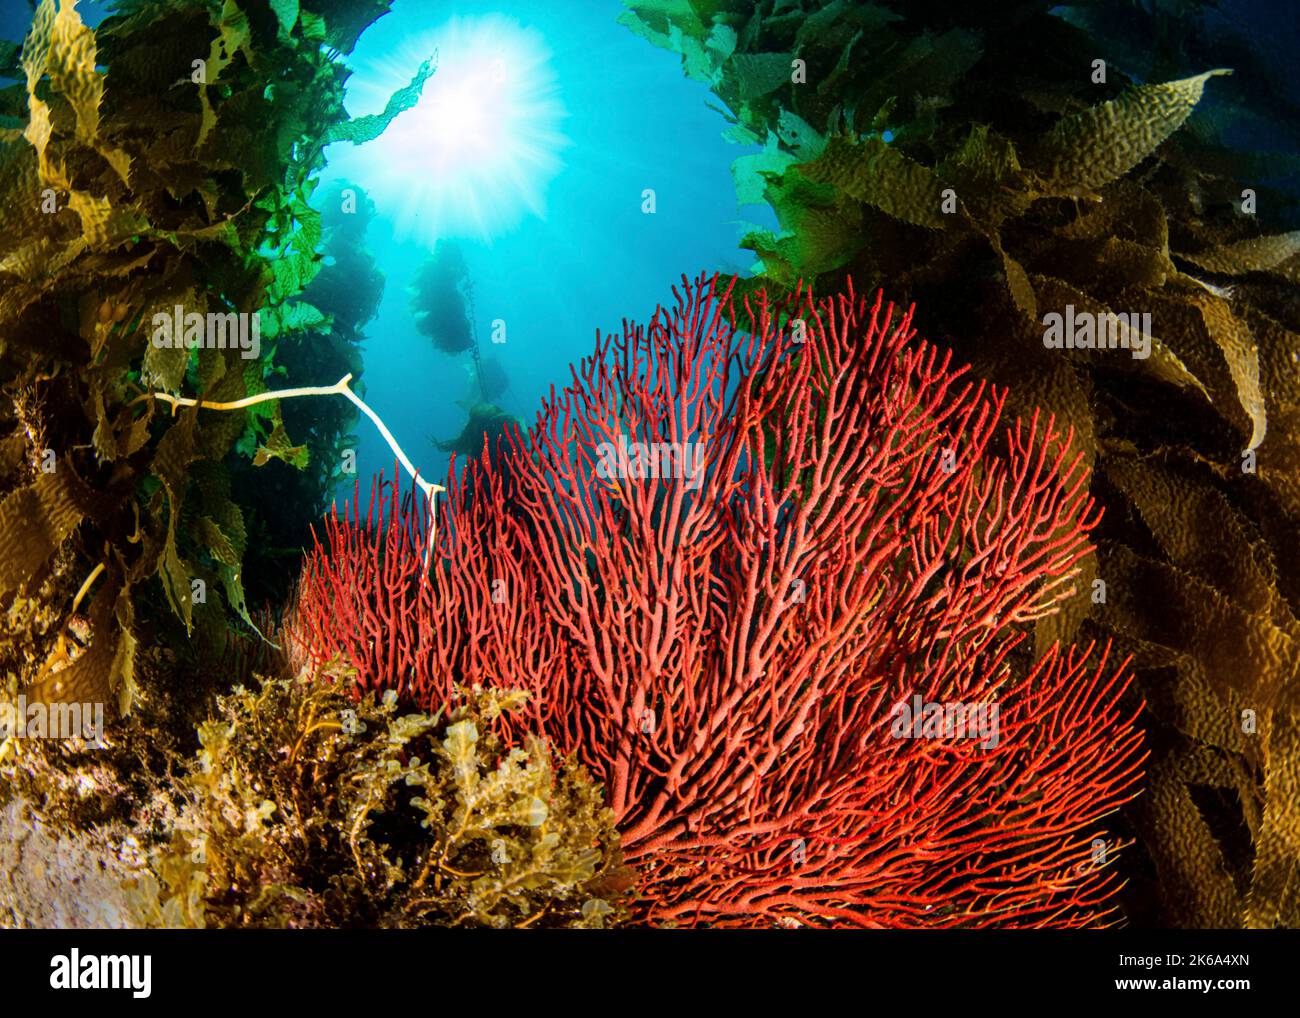 A gorgonian sea fan enjoys the rays of the sun through the kelp forests of California. Stock Photo